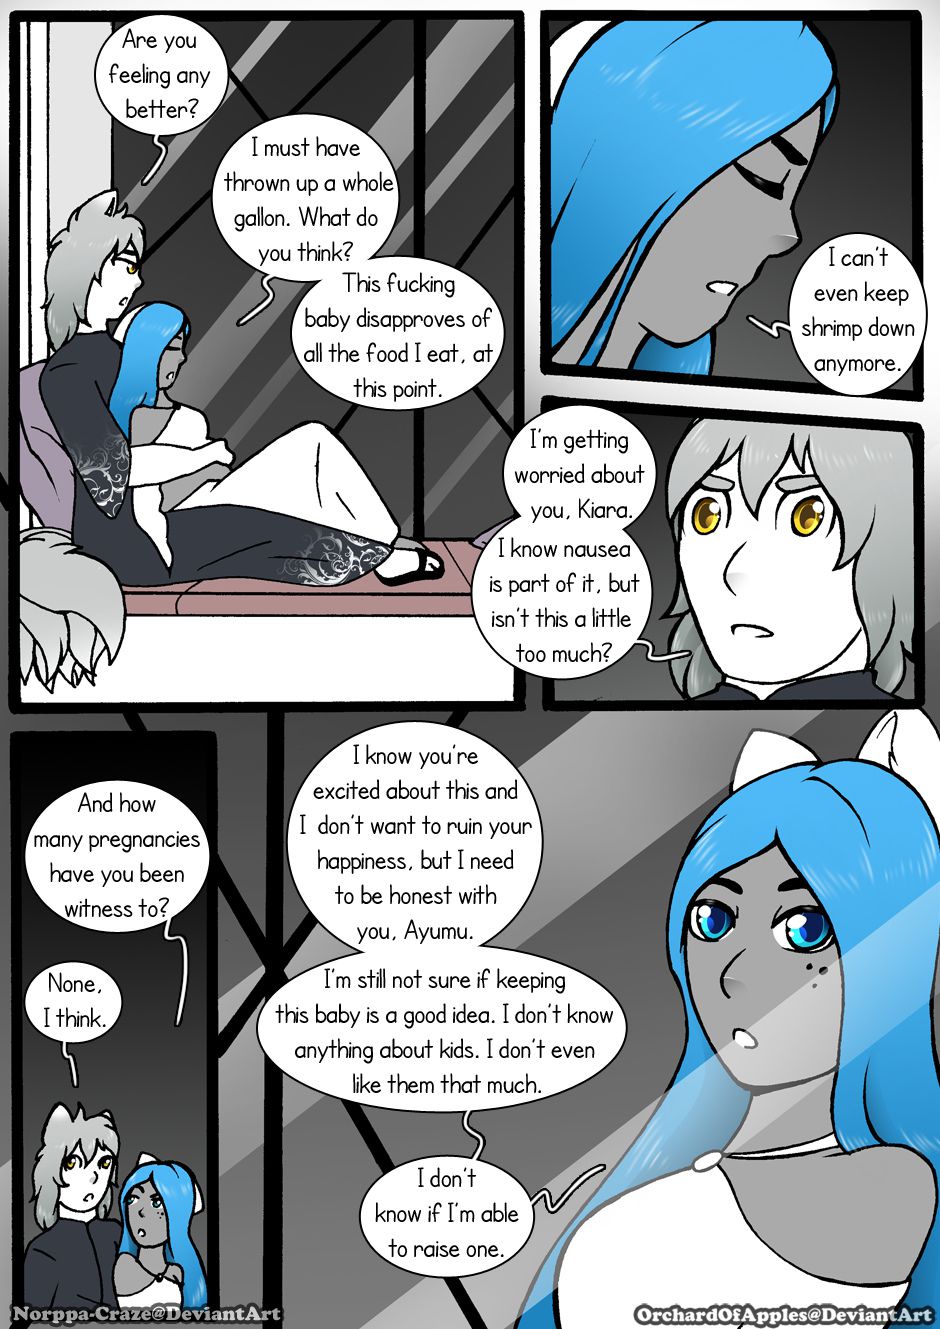 [Jeny-jen94] Between Kings and Queens [Ongoing] 306